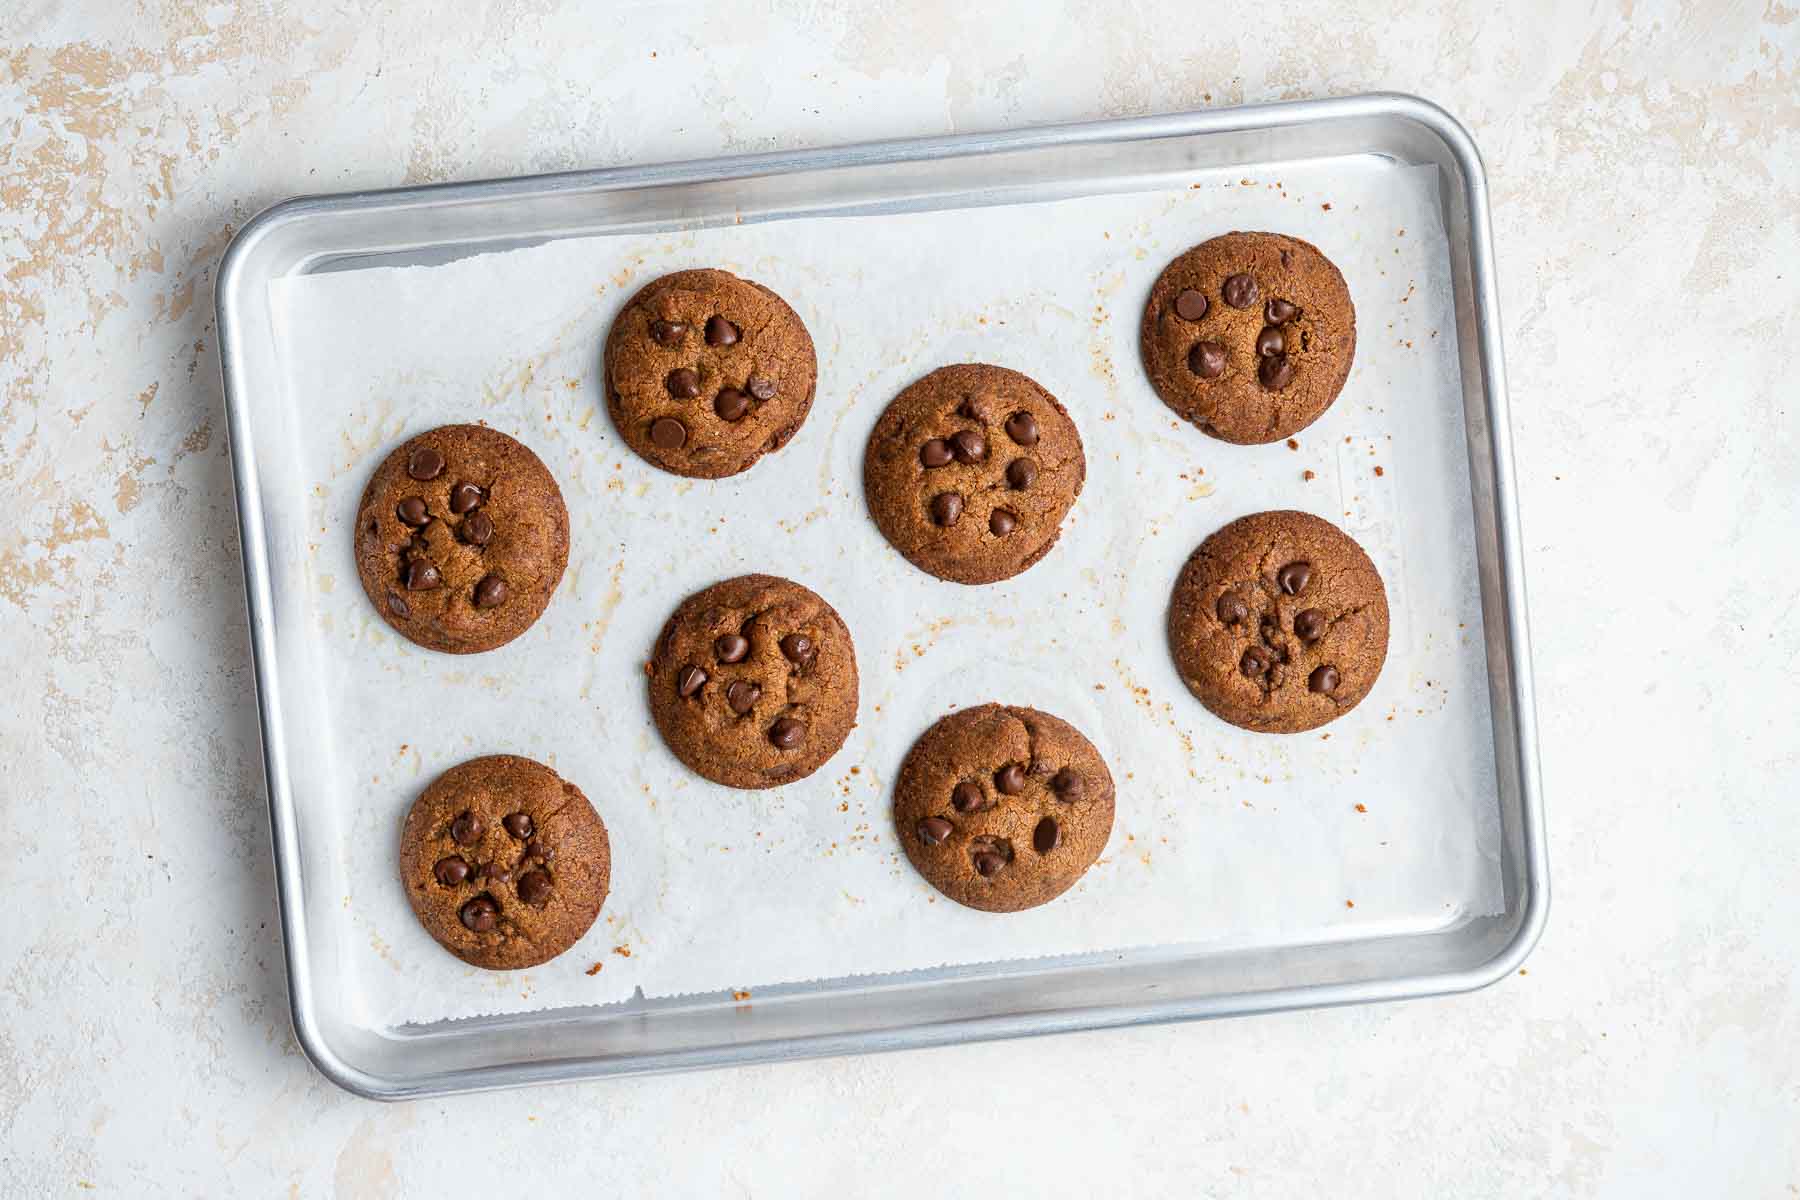 Eight healthy chocolate chip cookies with coconut oil on baking sheet.